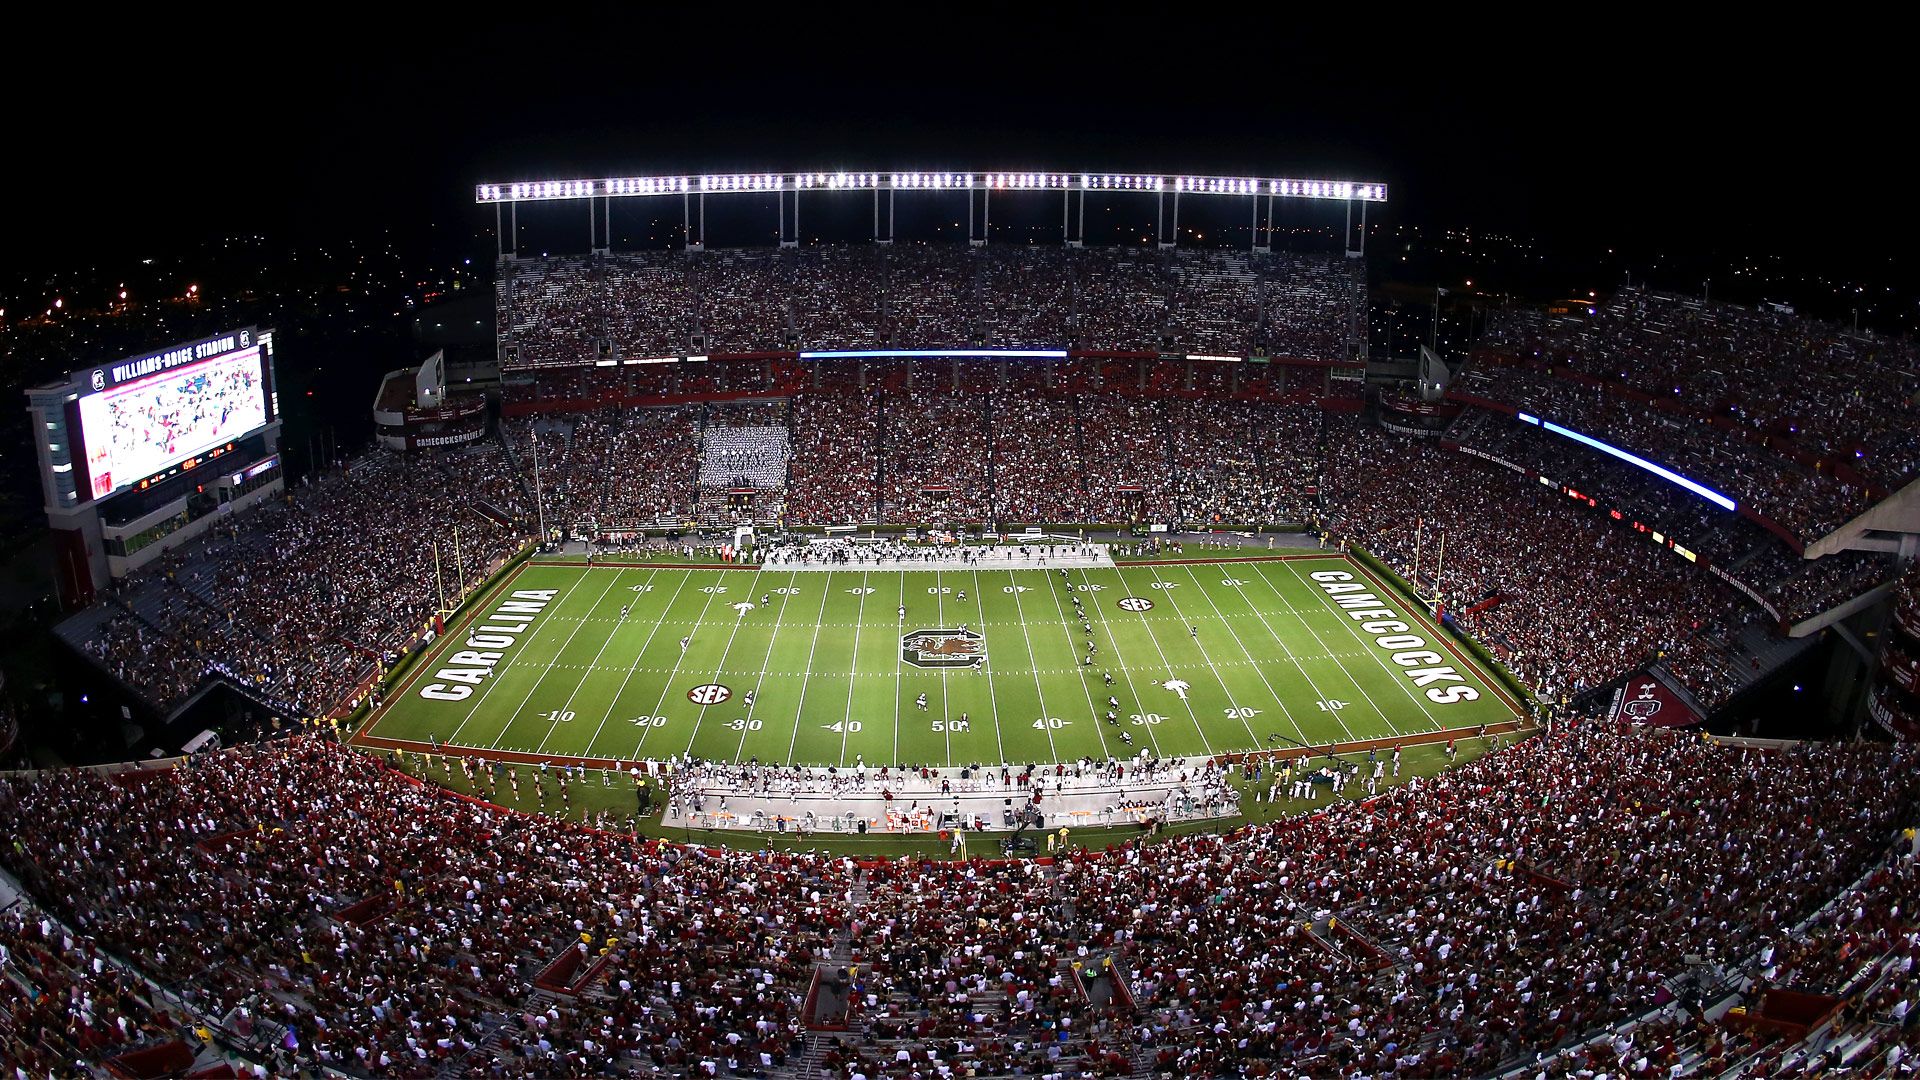 South Carolina Gamecocks is expected to limit participation in the spring games of 9,000 fans